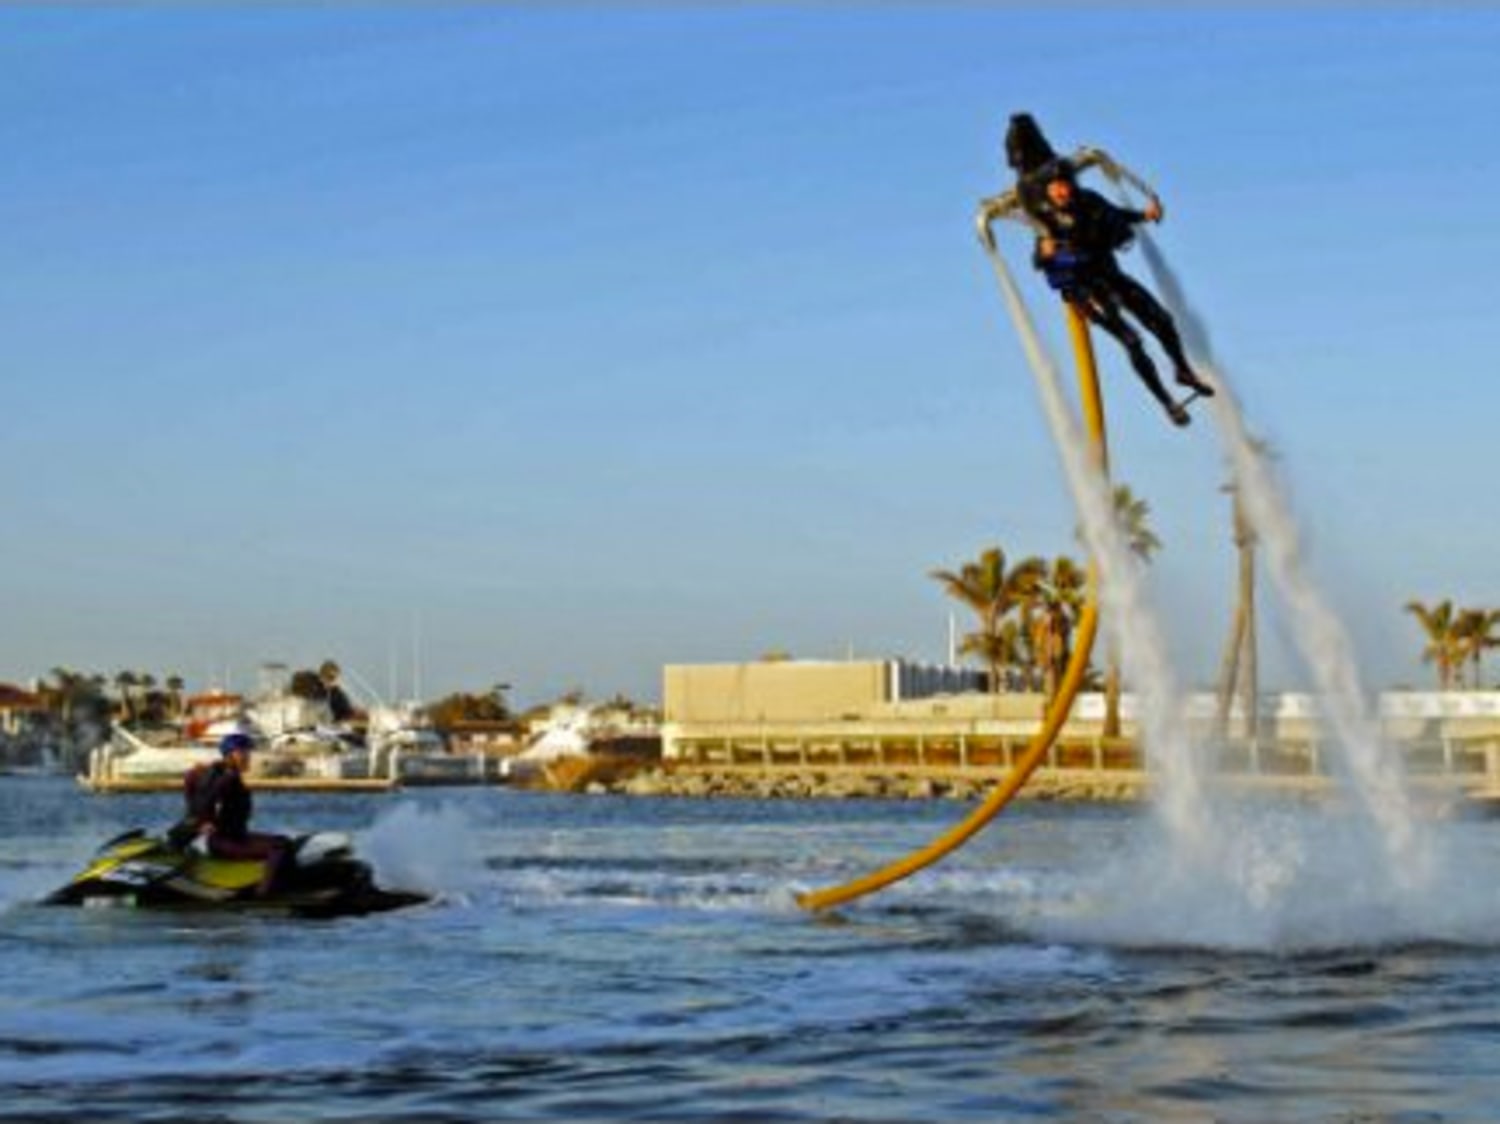 The Water Jet Pack